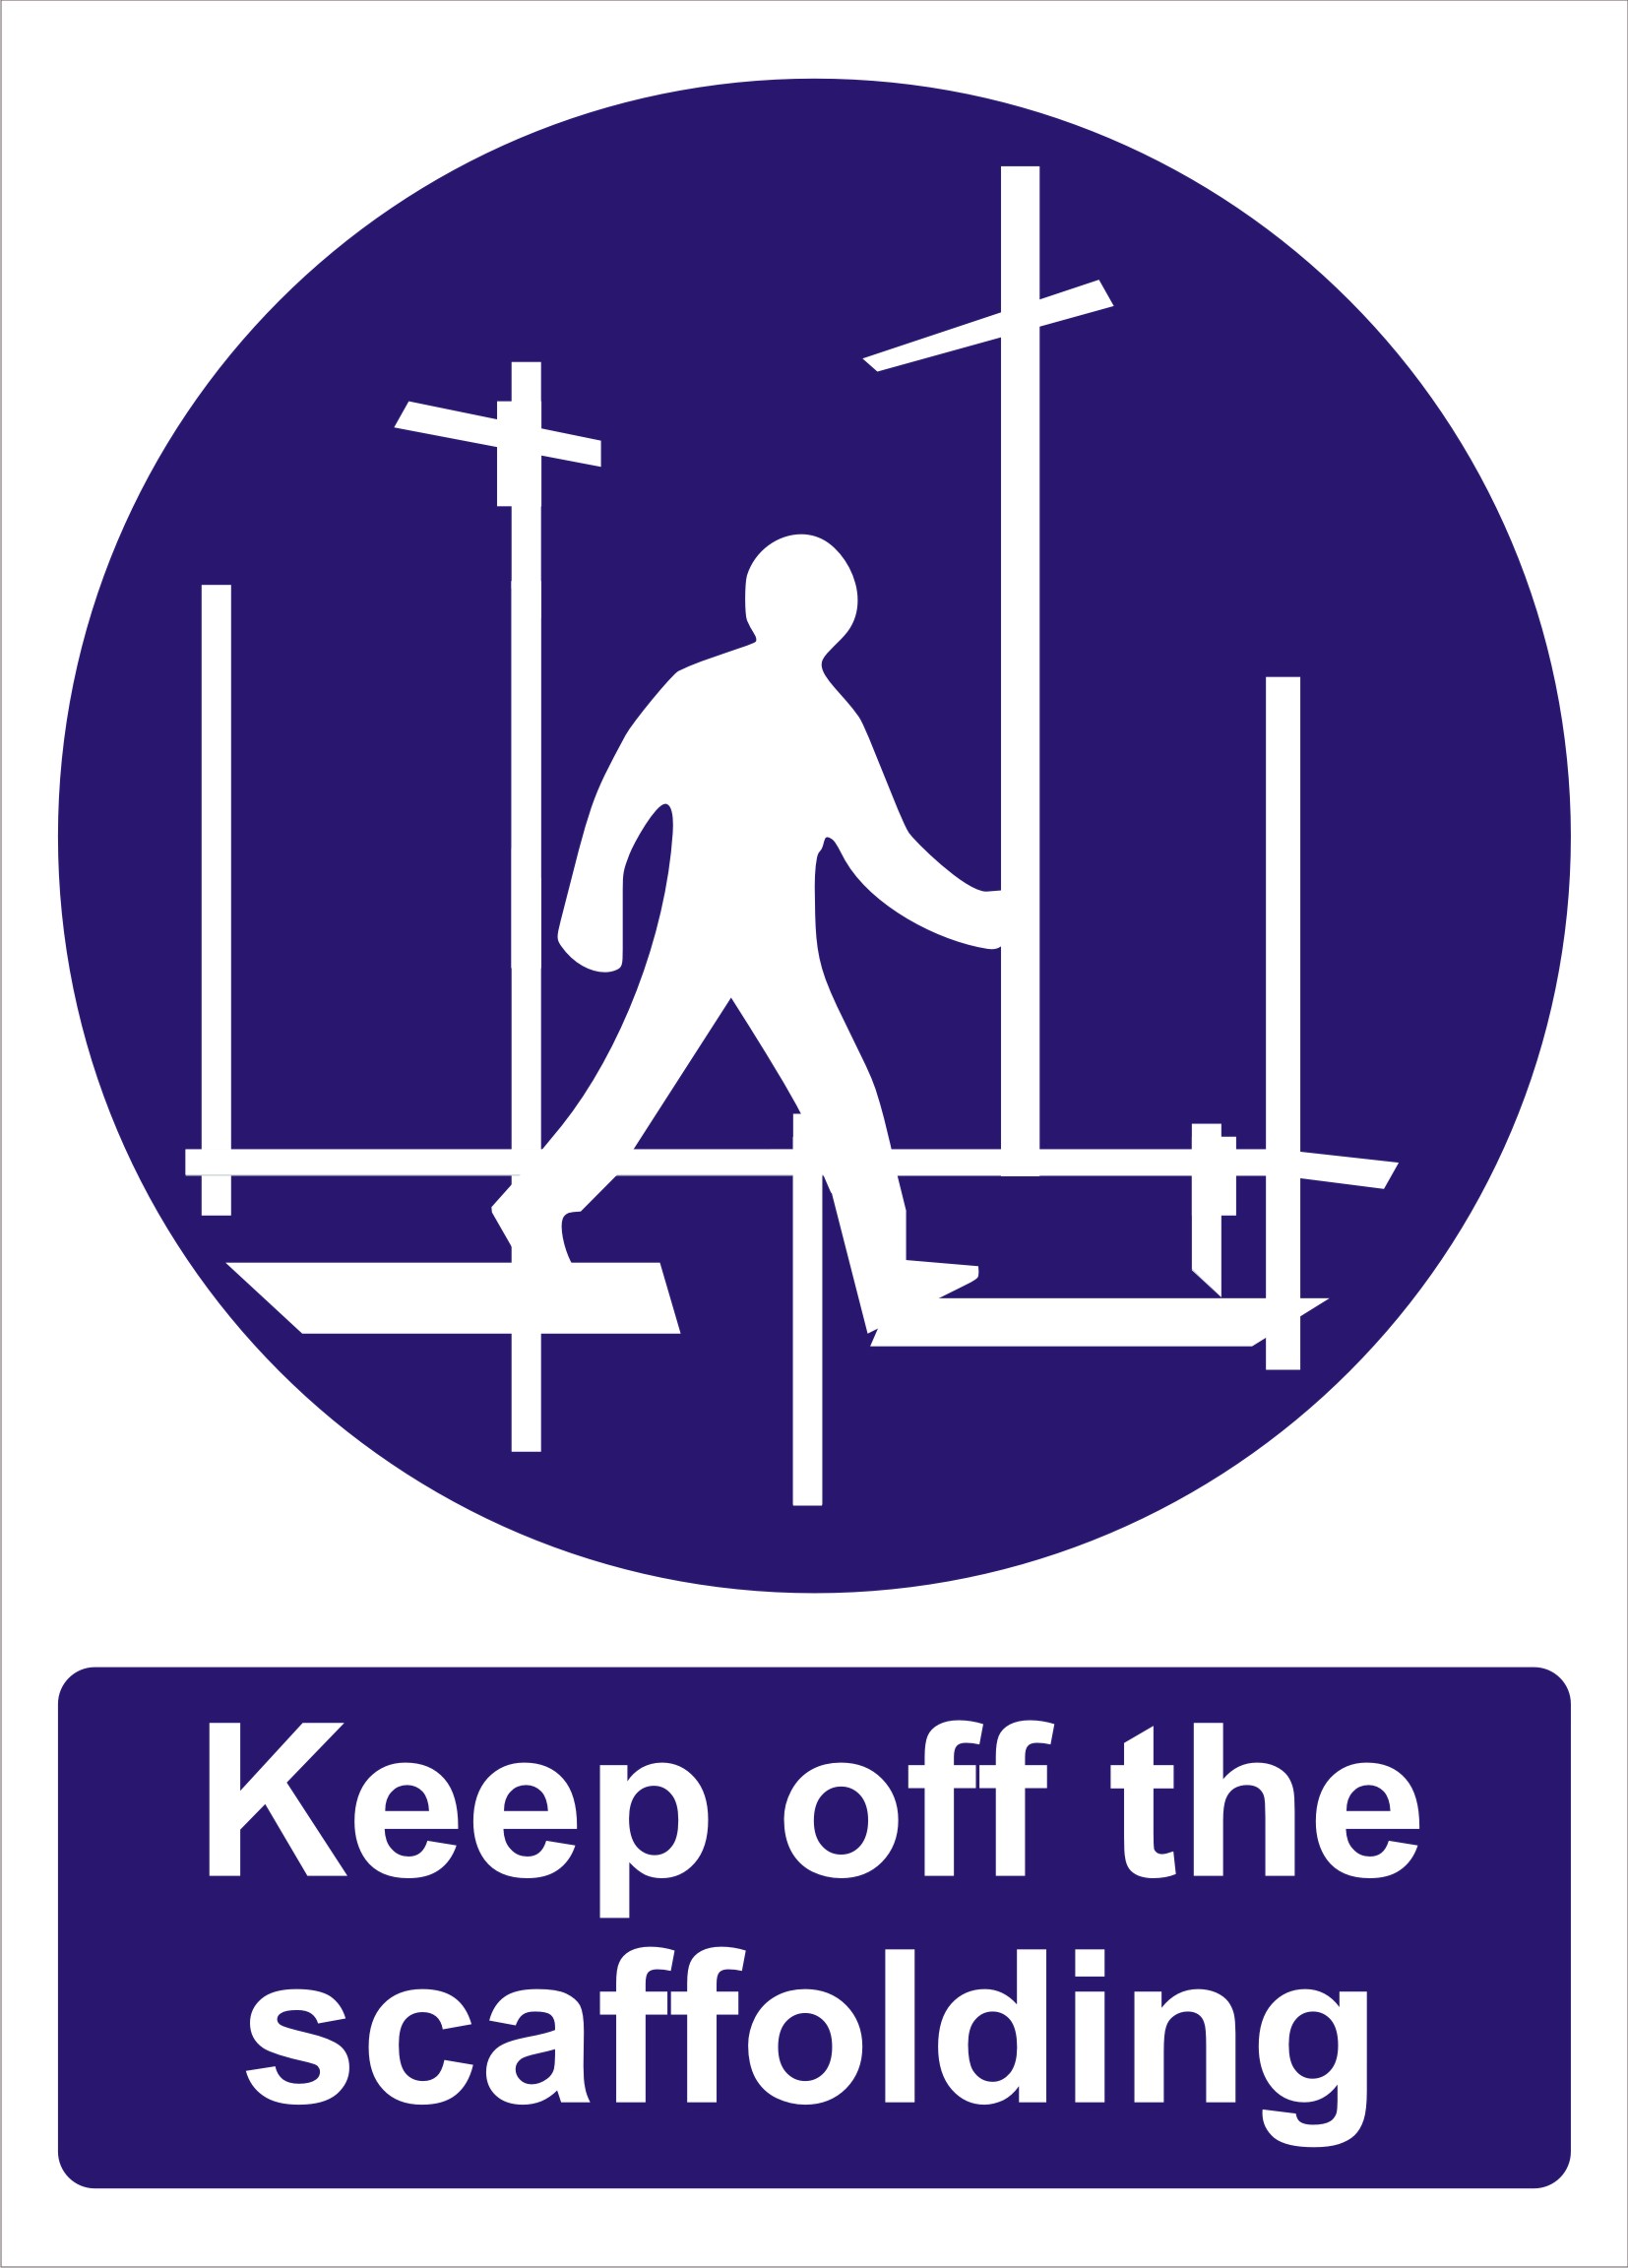 Keep off the scaffolding sign